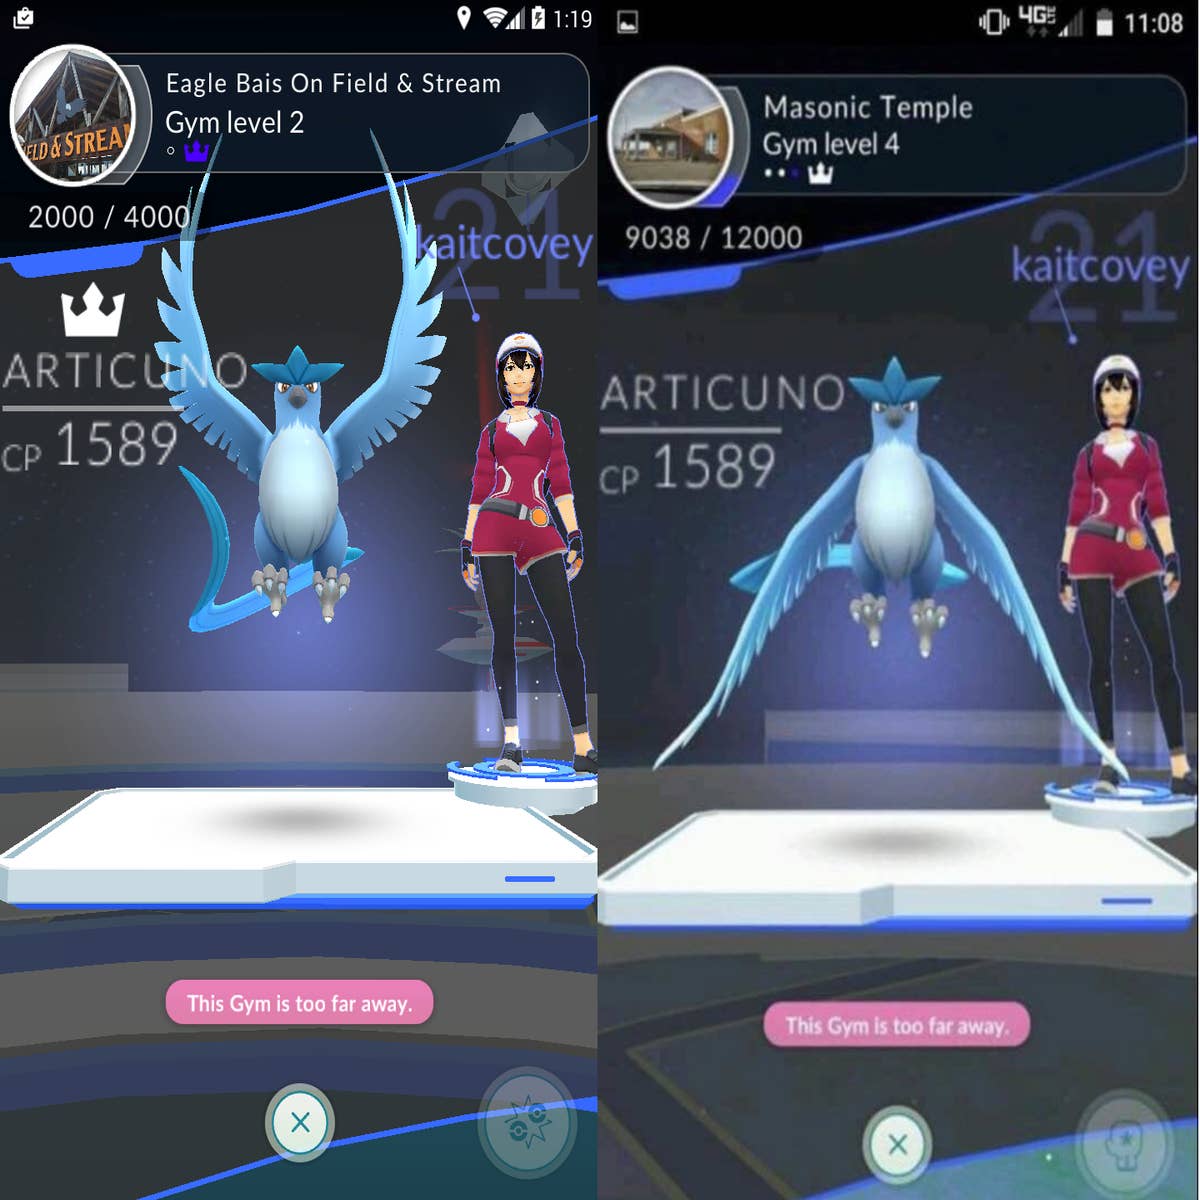 This Guy Might Have Hacked 'Pokemon GO,' Finding Legendary Pokemon